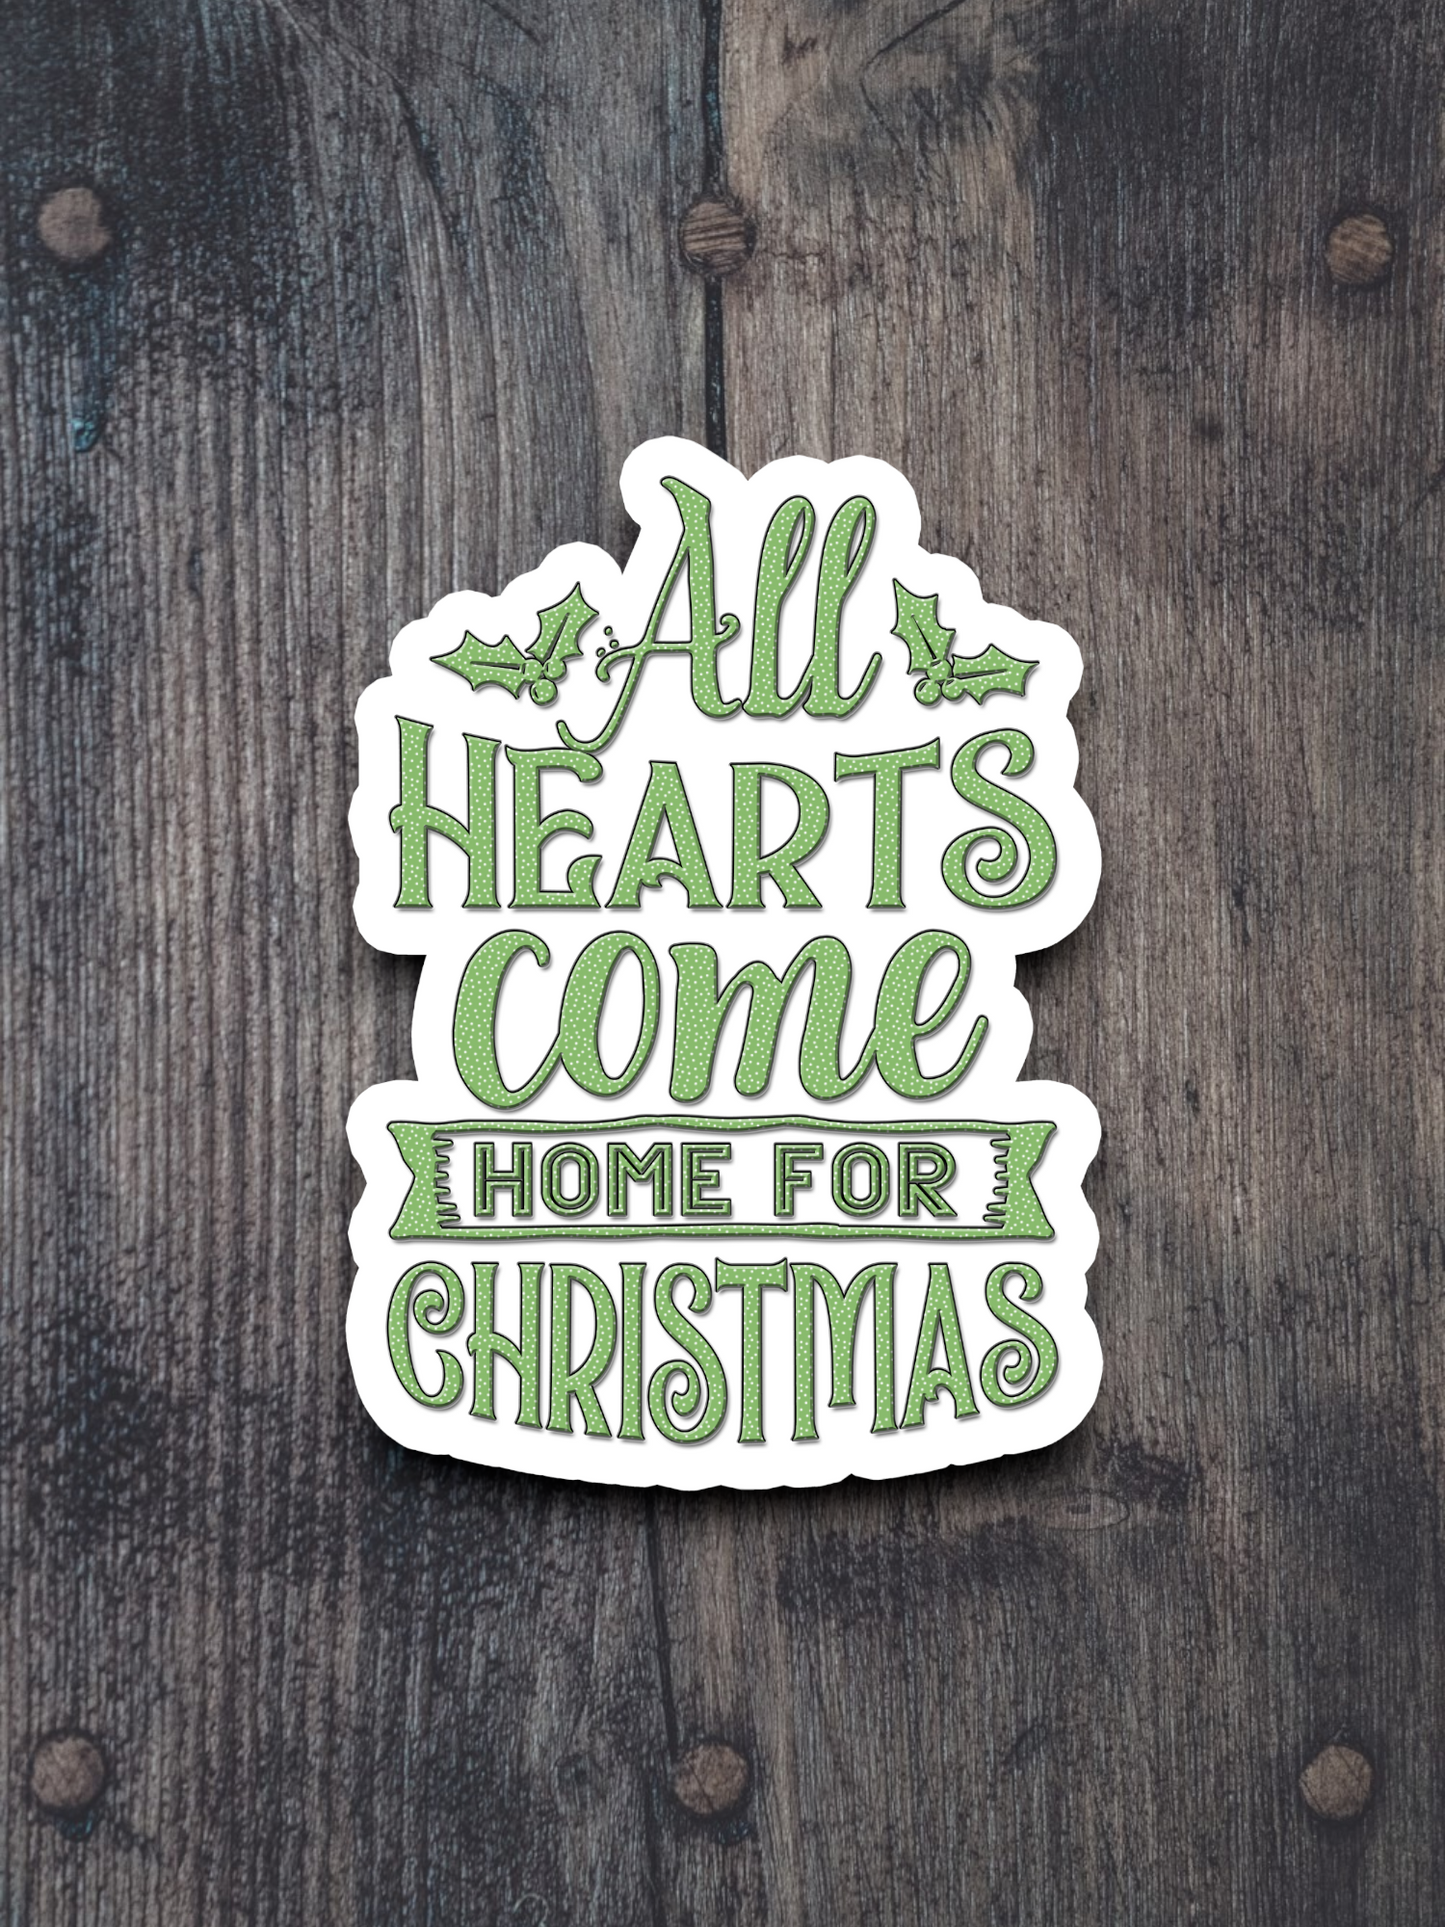 All Hearts Come Home for Christmas - Holiday Sticker